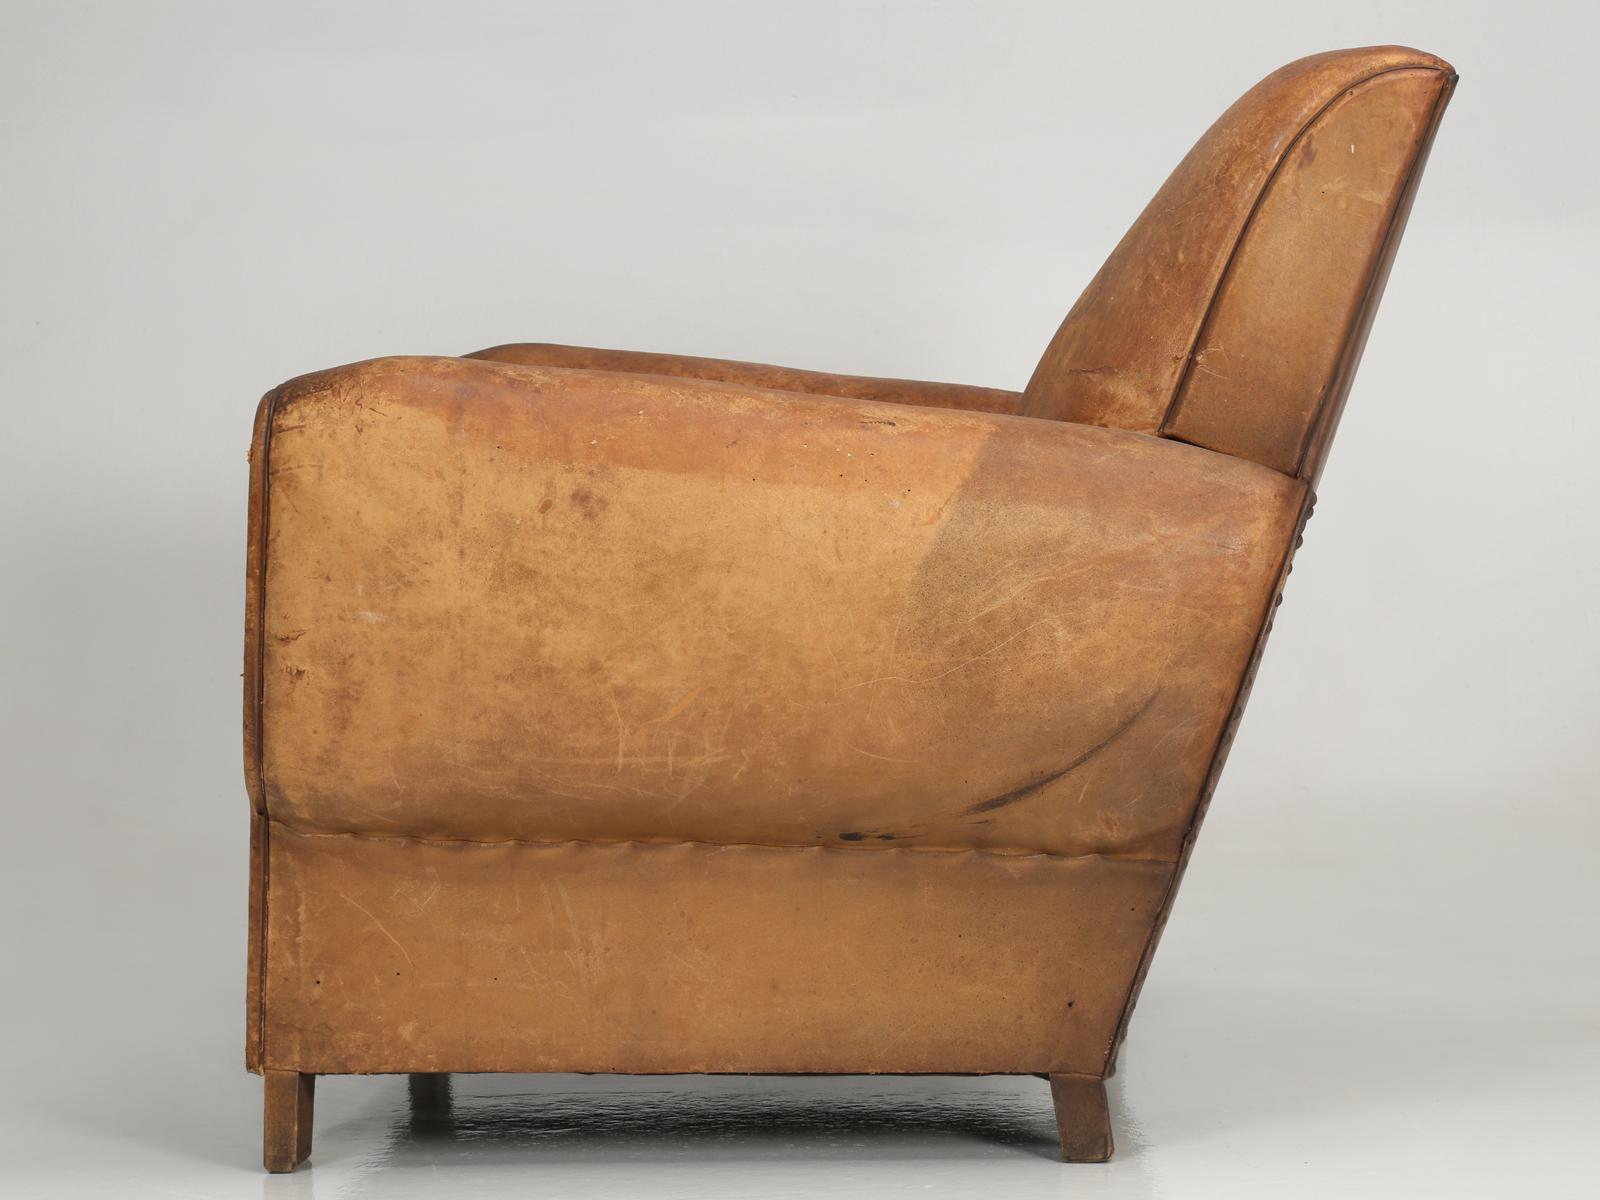 Hand-Crafted French Art Deco Club Chair Carefully Restored to Look Like it Wasn't Touched